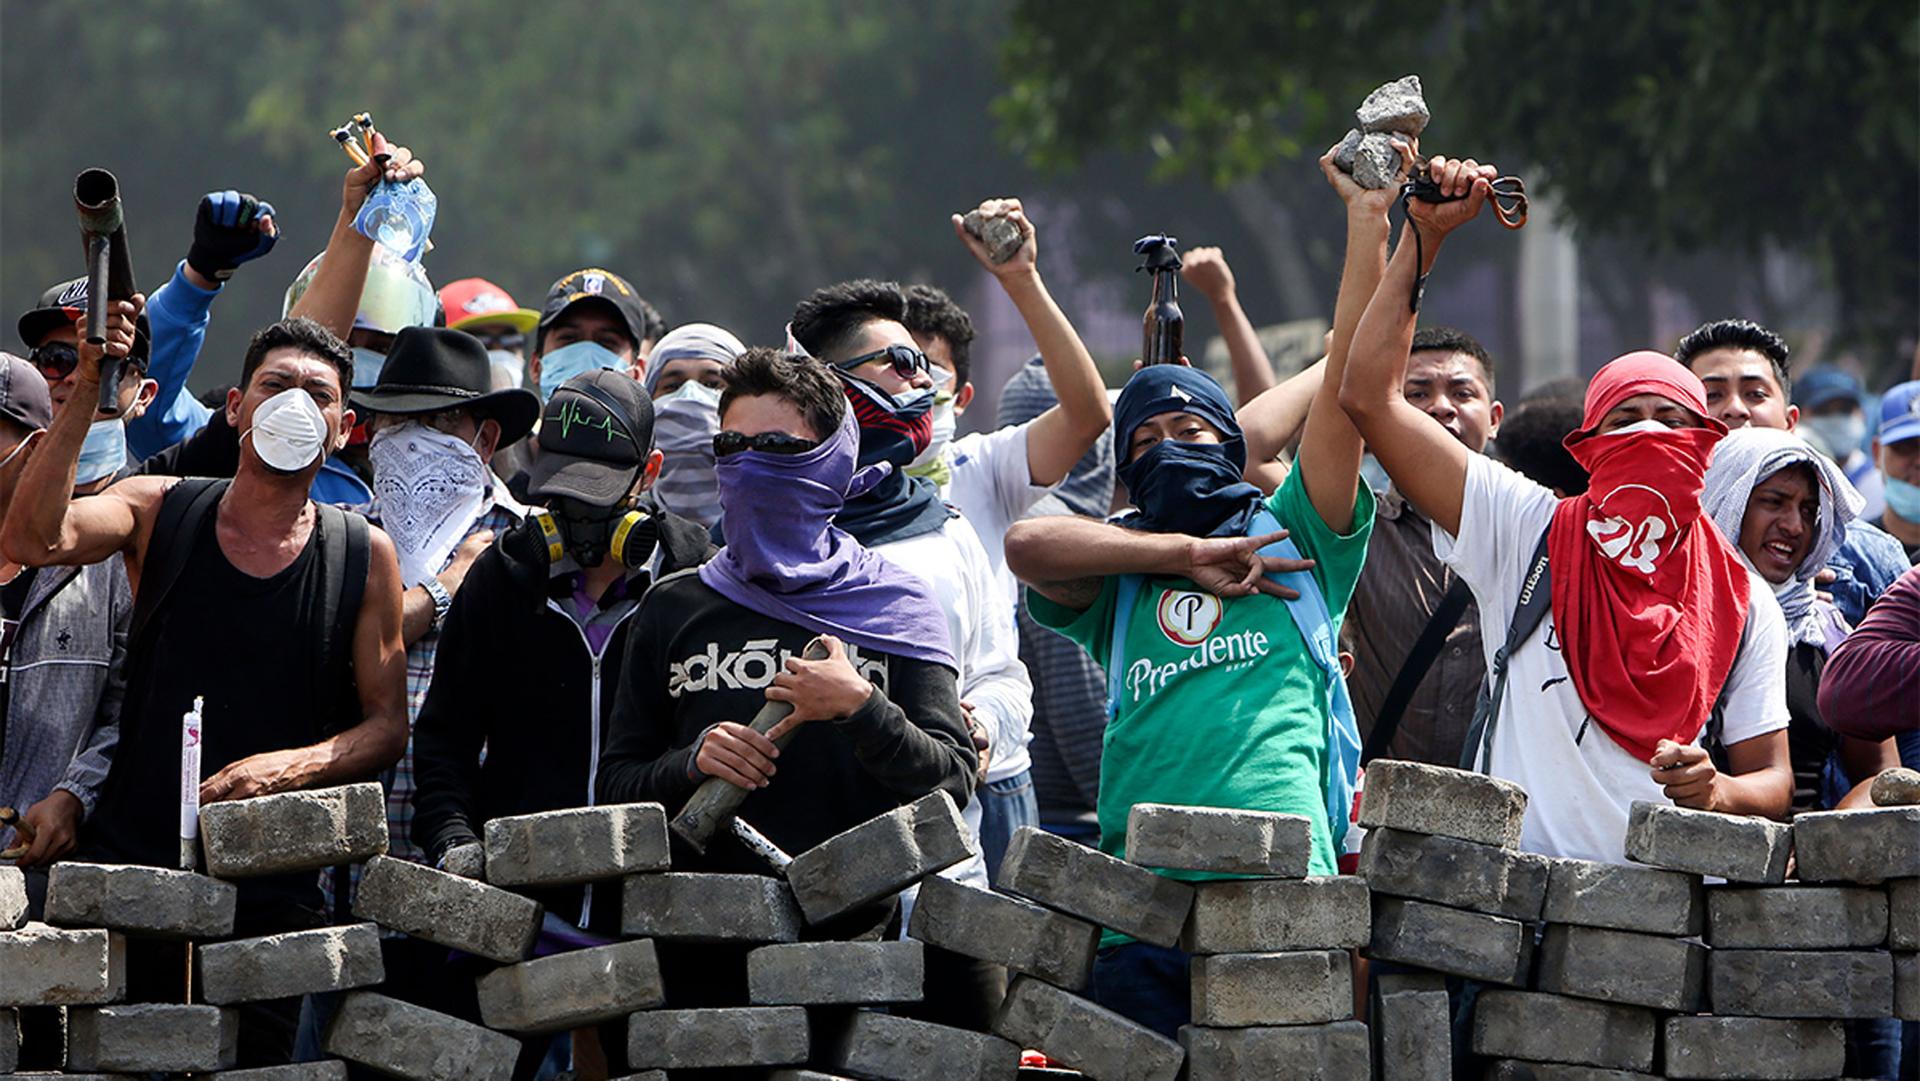 Protesters yell from behind the roadblock they erected as they face off with security forces near the University Politecnica de Nicaragua, UPOLI, in Managua, Nicaragua